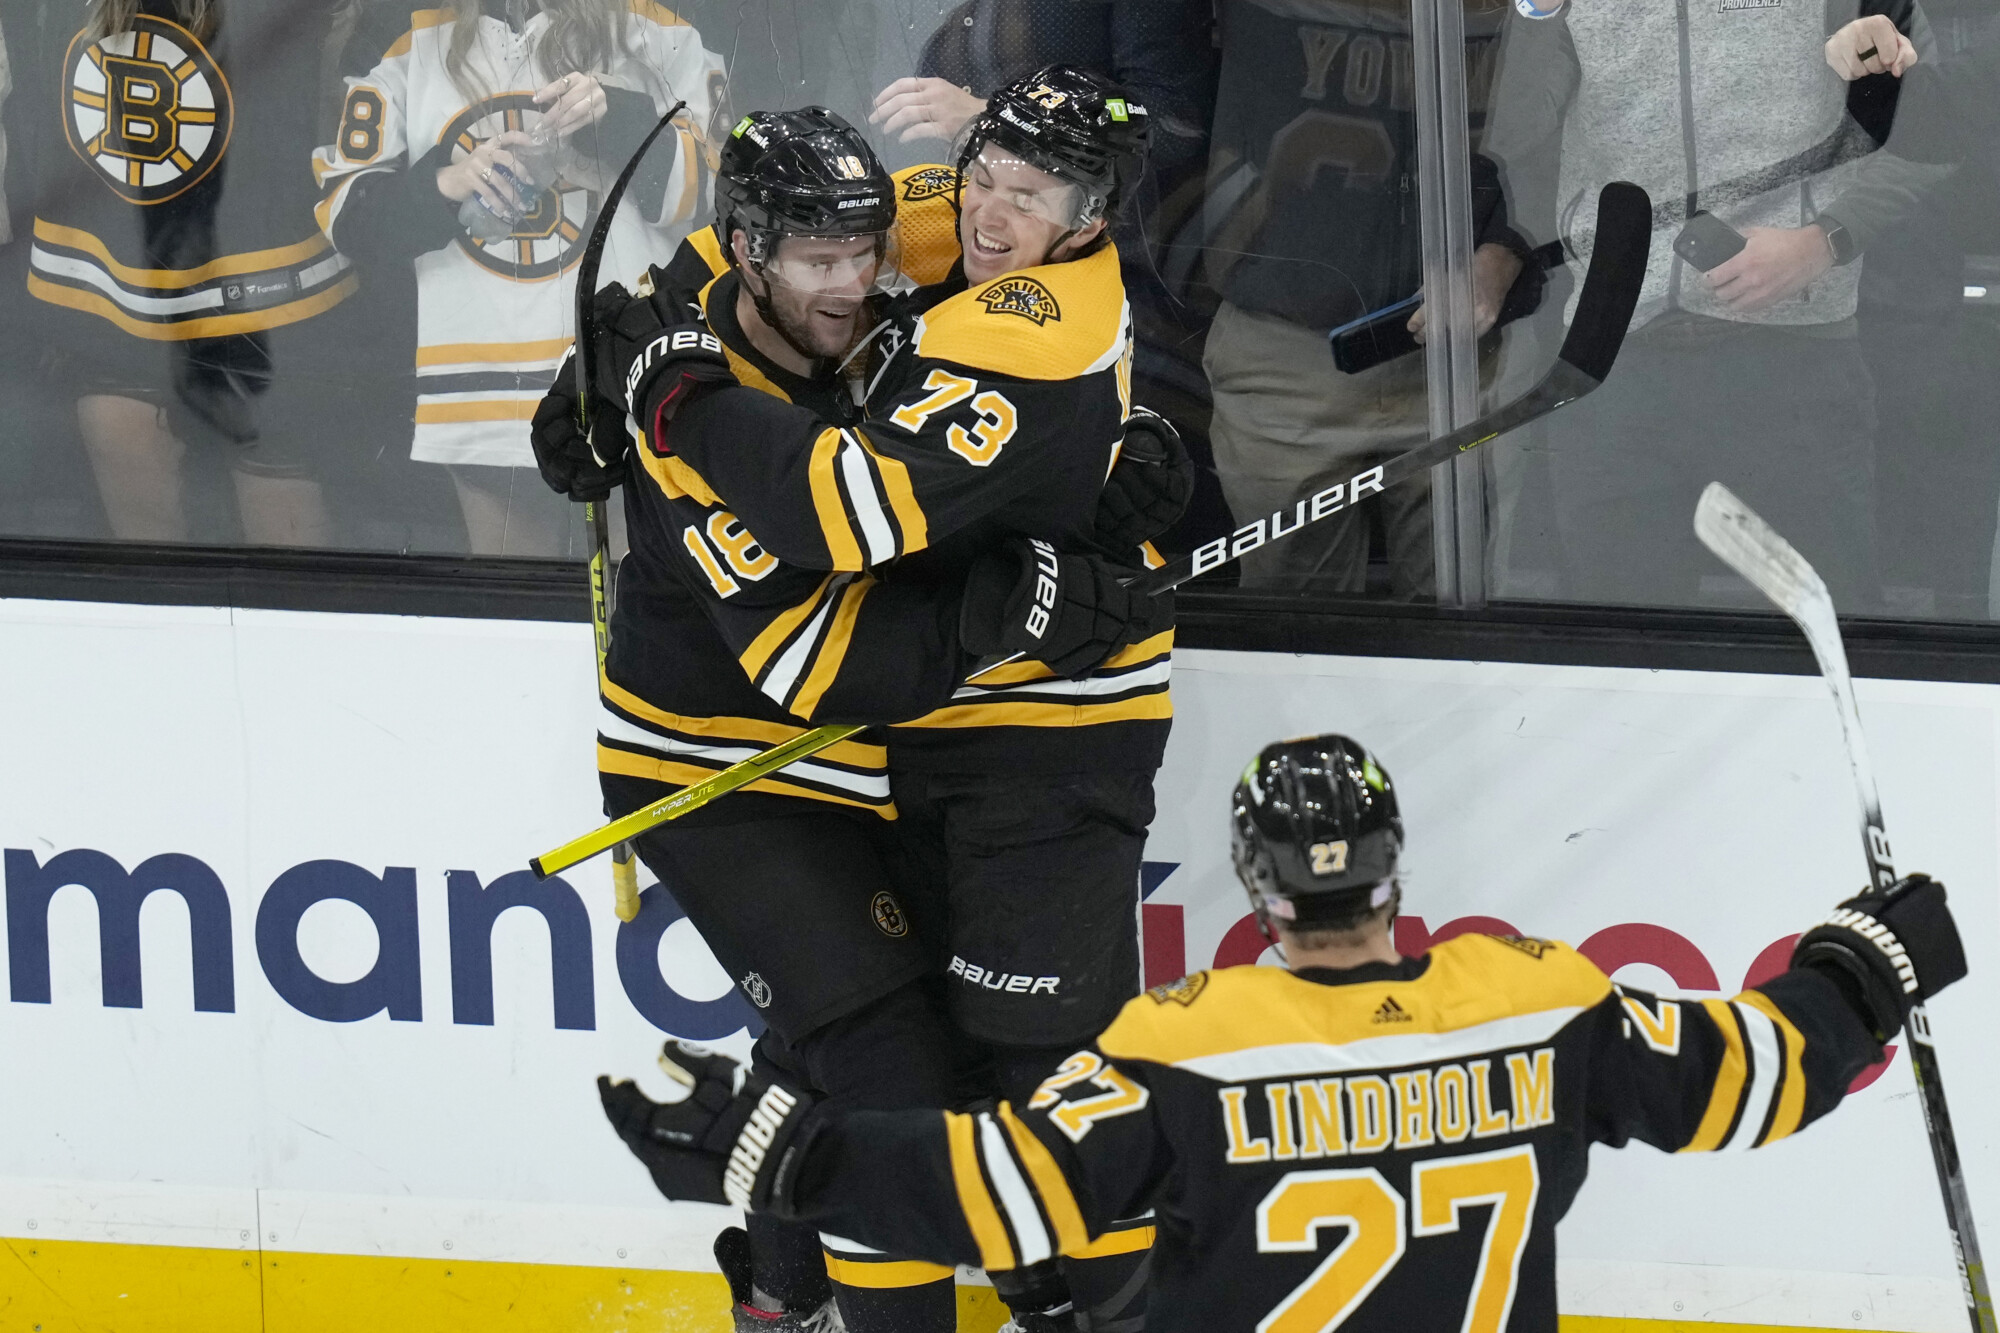 Charlie McAvoy's double-overtime goal lifts BU - The Boston Globe